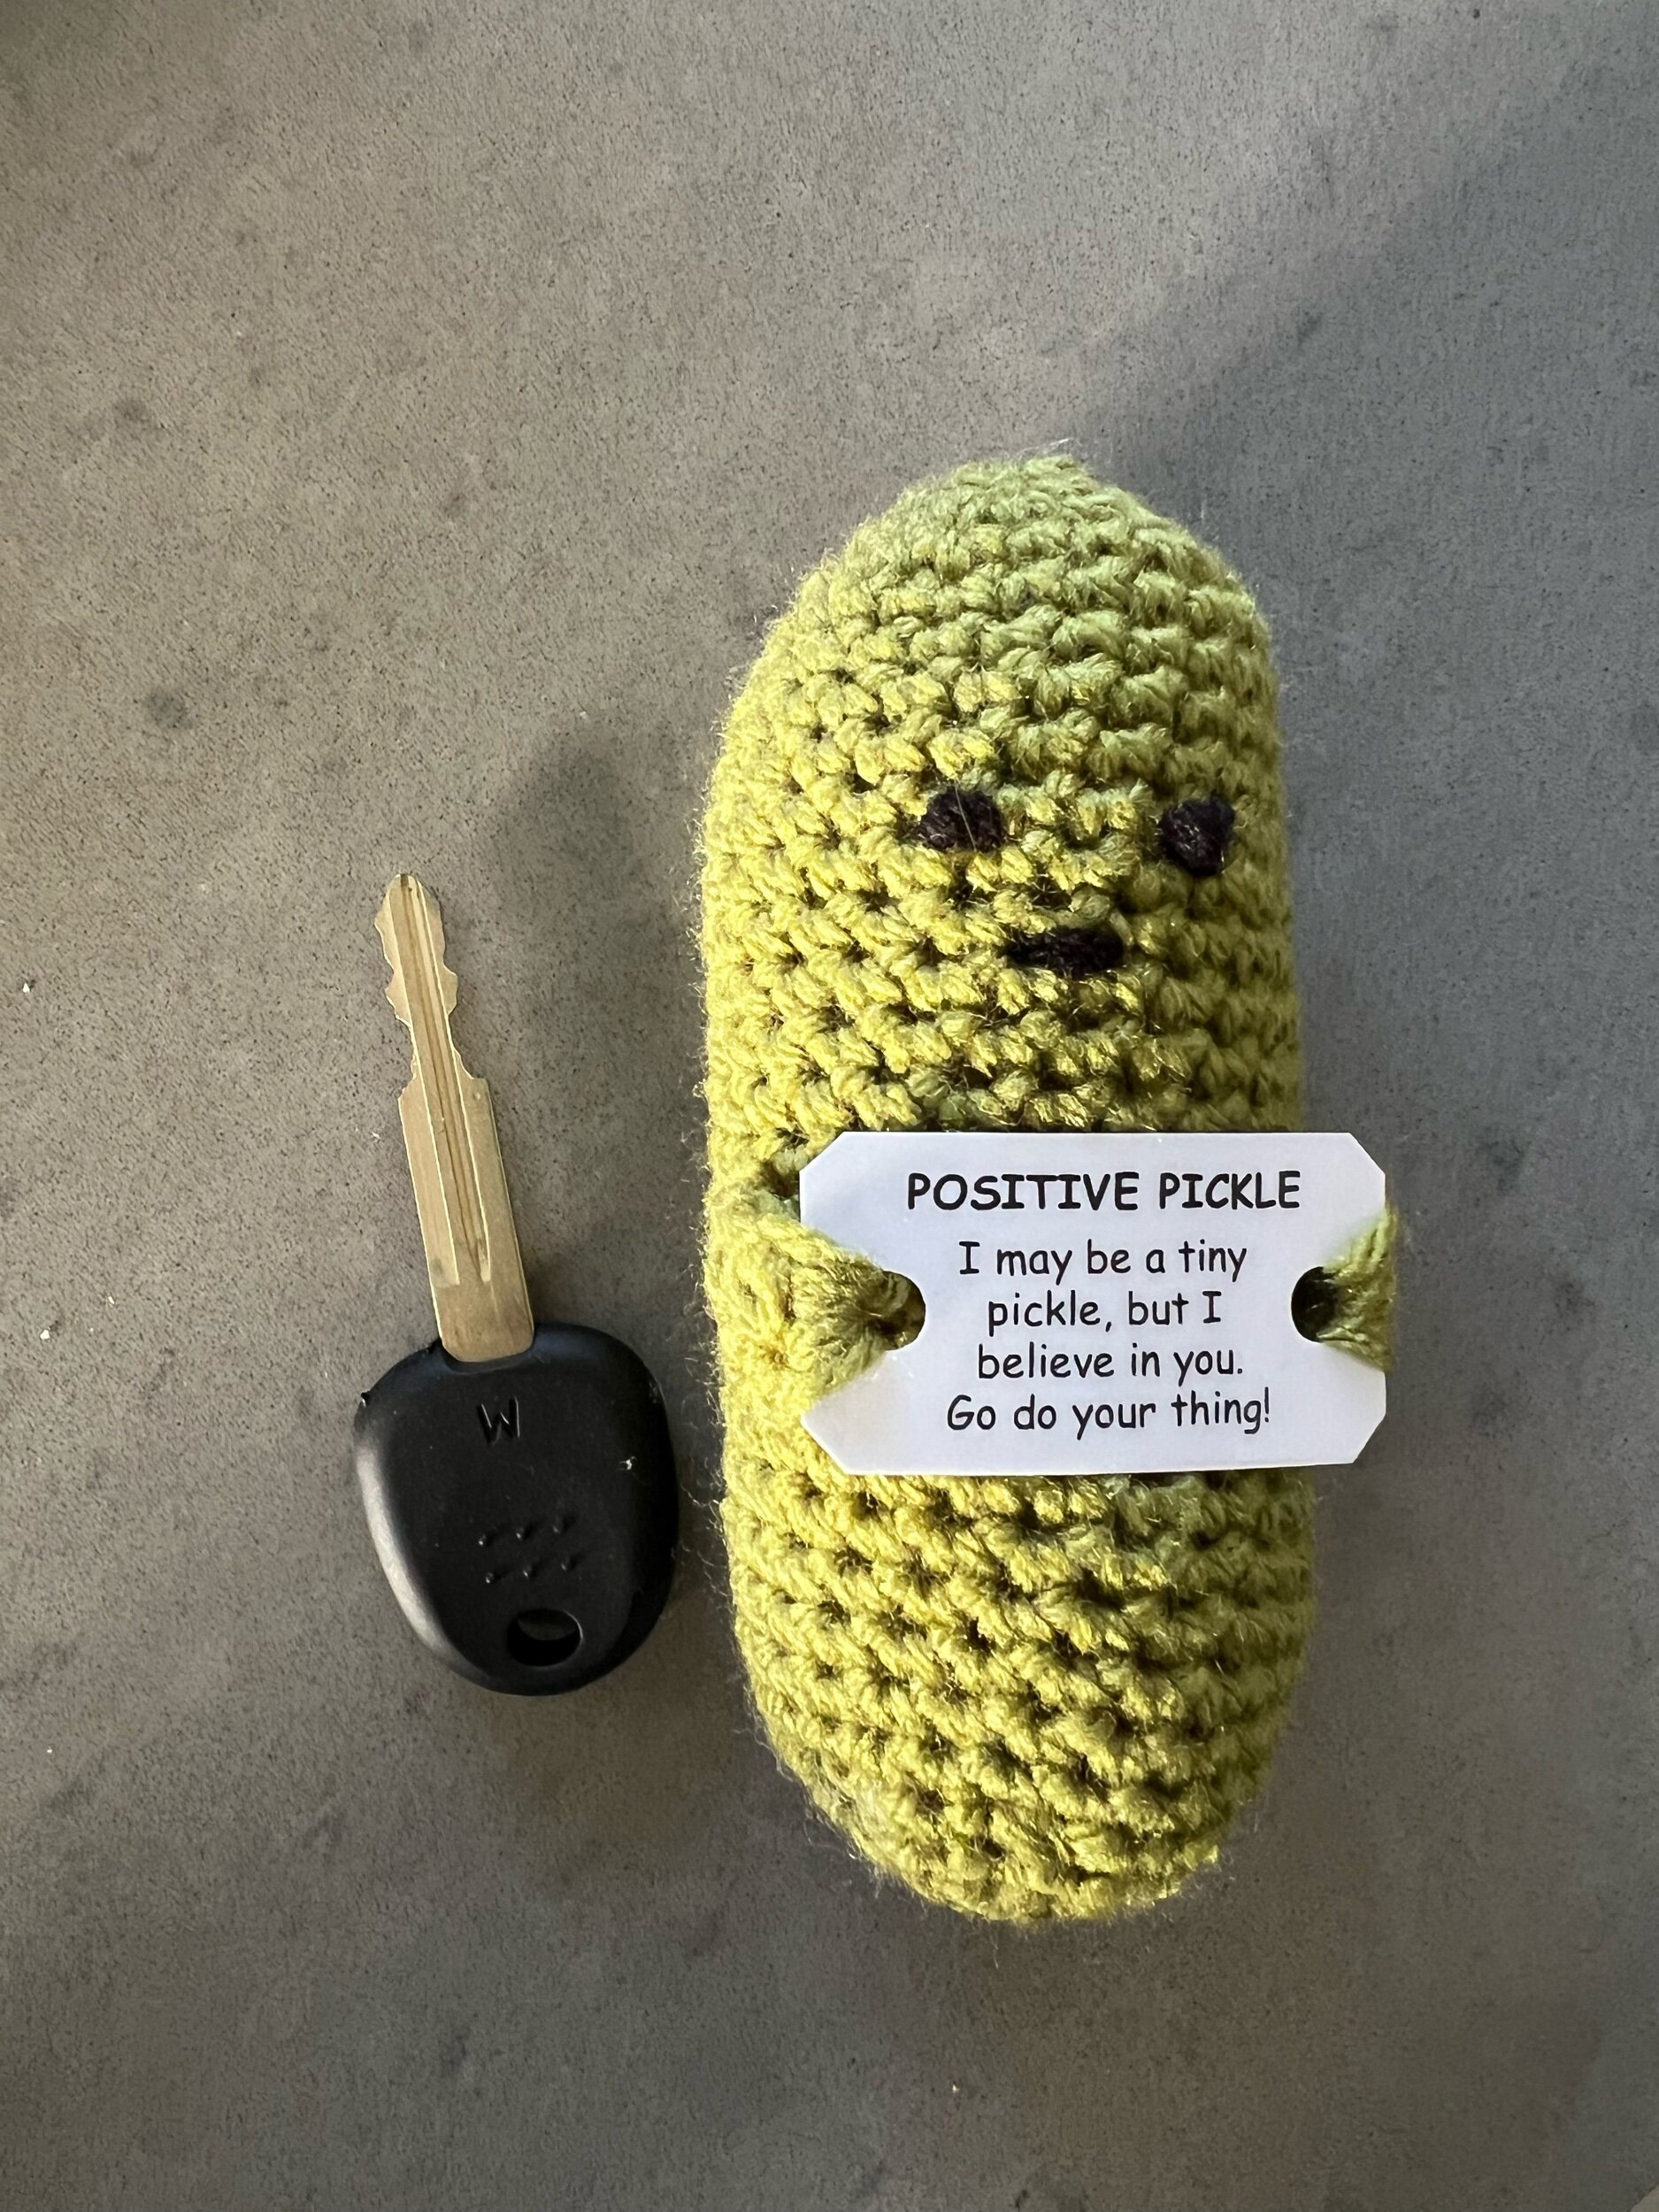 Positive Pickle — Psychology Services Perth - Masters & Co.